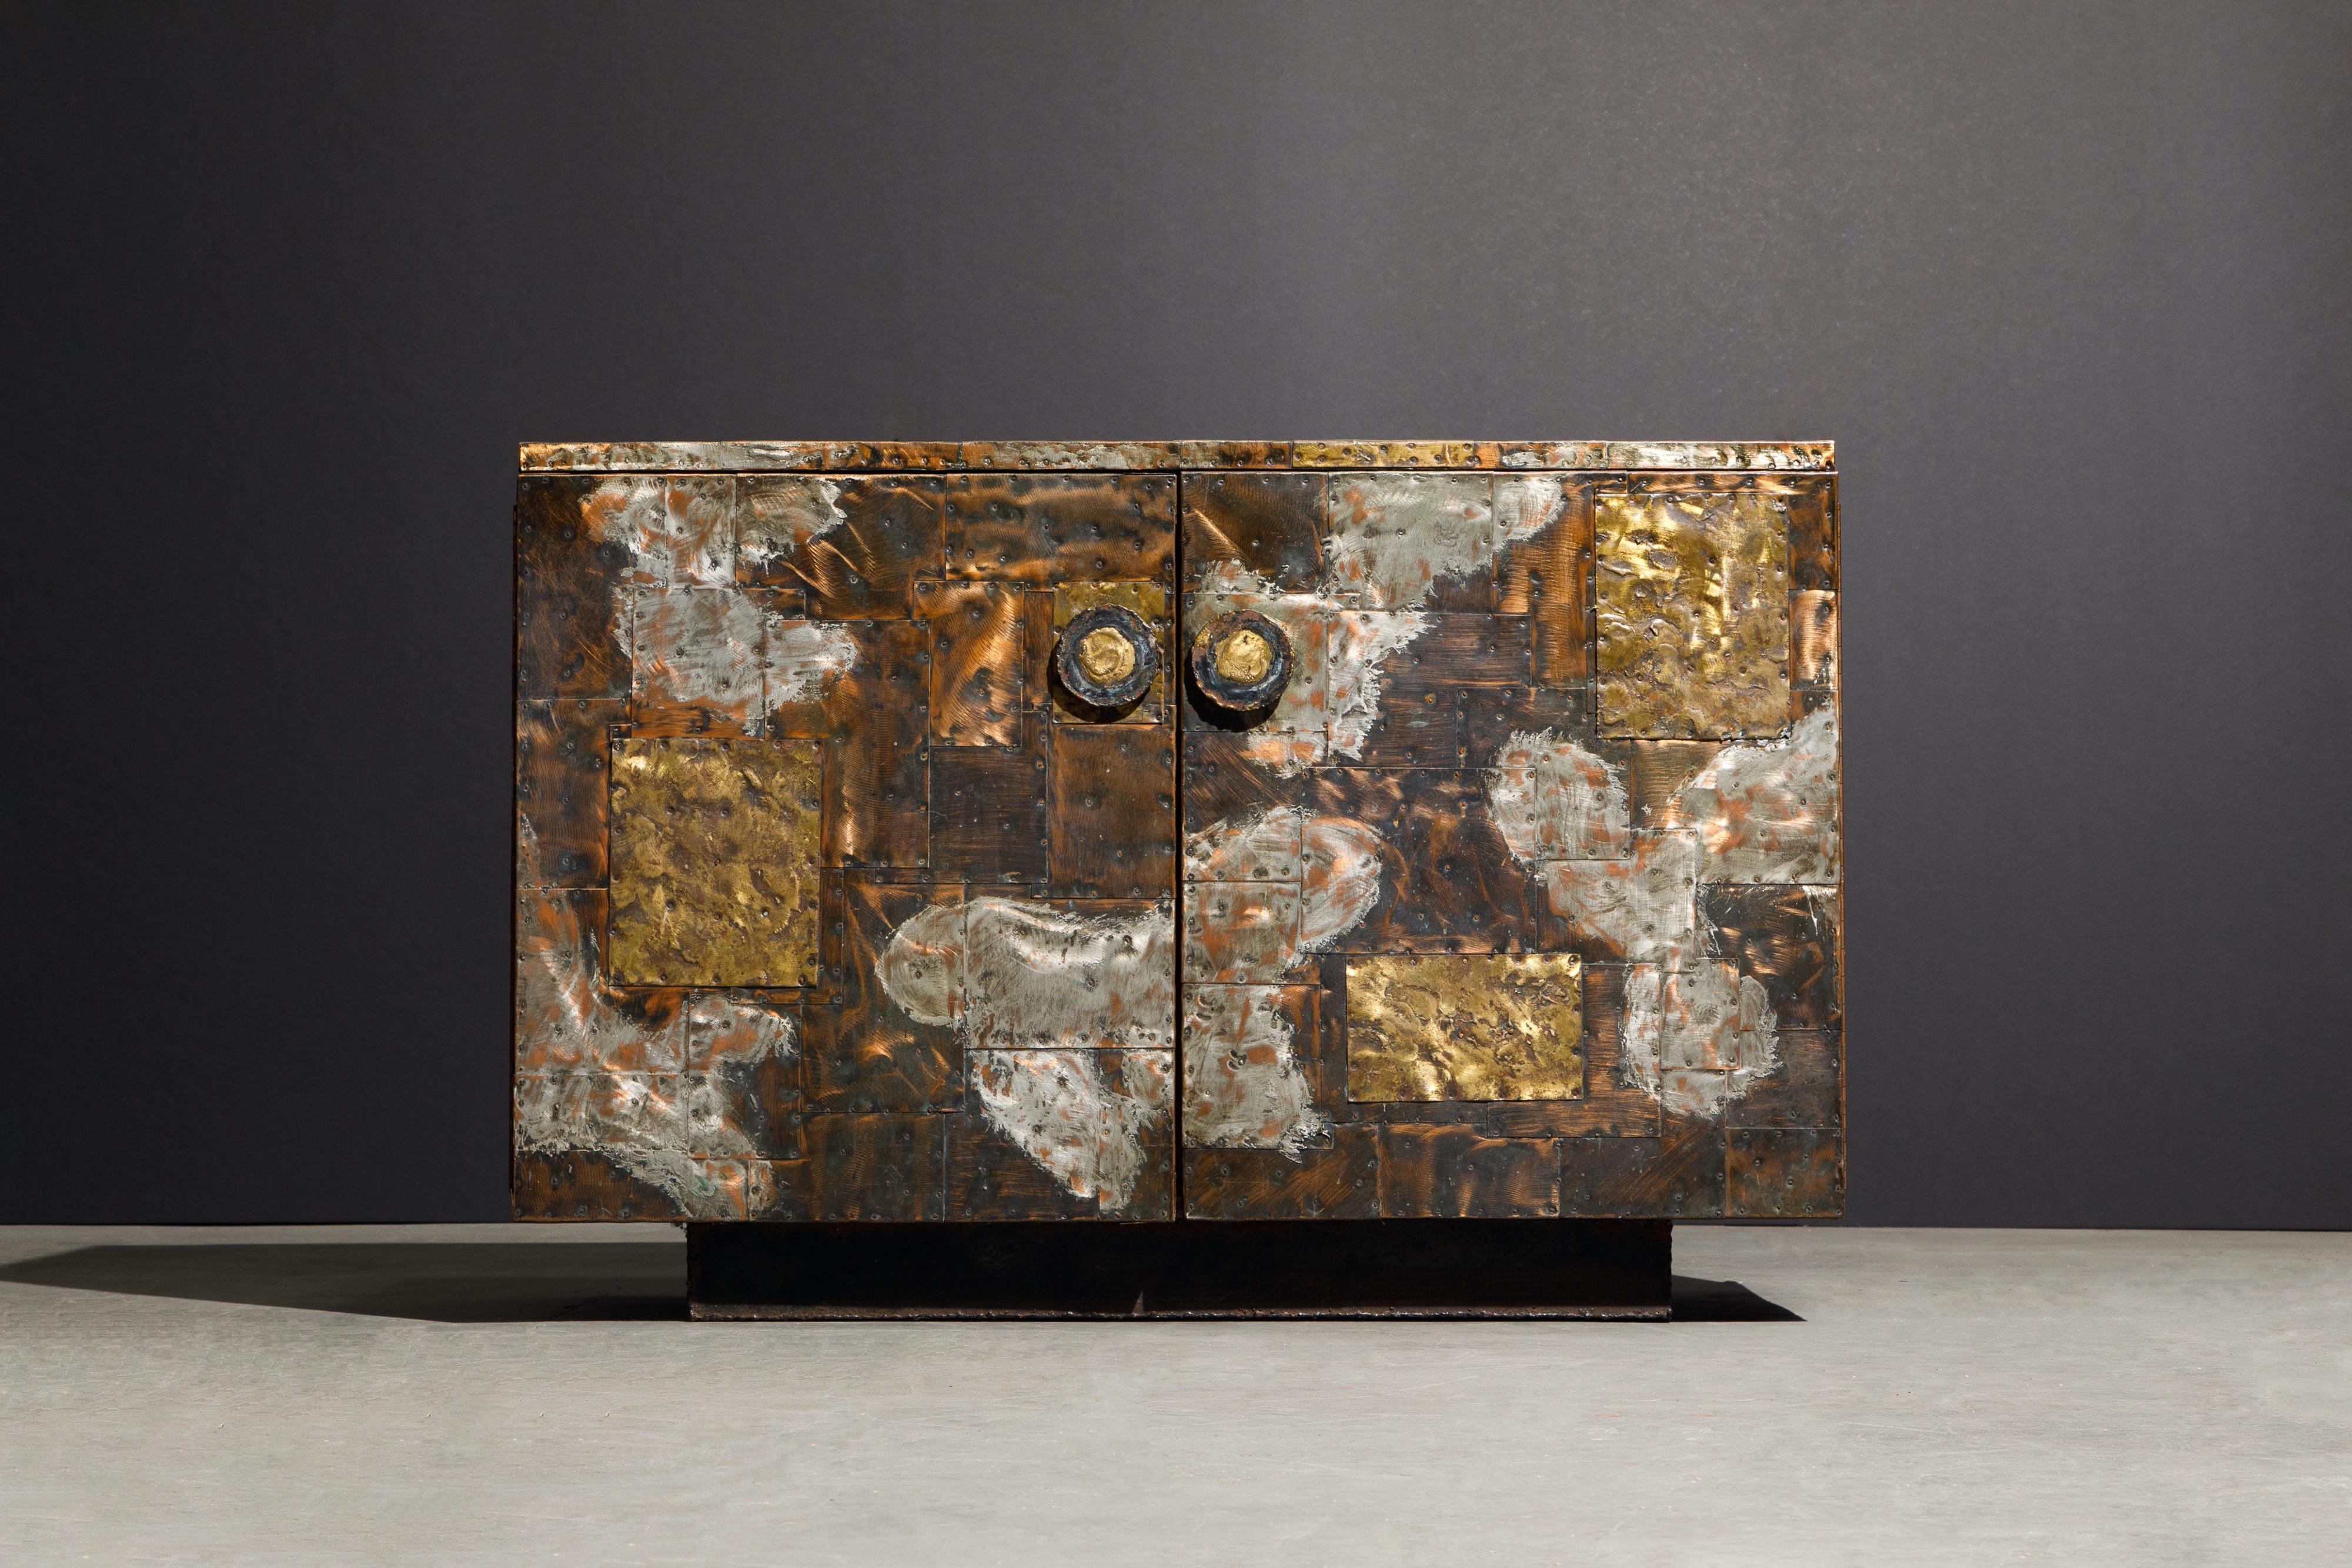 Stunning and rare copper clad sideboard cabinet by Paul Evans for Directional, produced in circa 1967. This incredible piece of design history is fabricated from patinated pieces of copper, brass, and pewter which have been welded and nailed in a